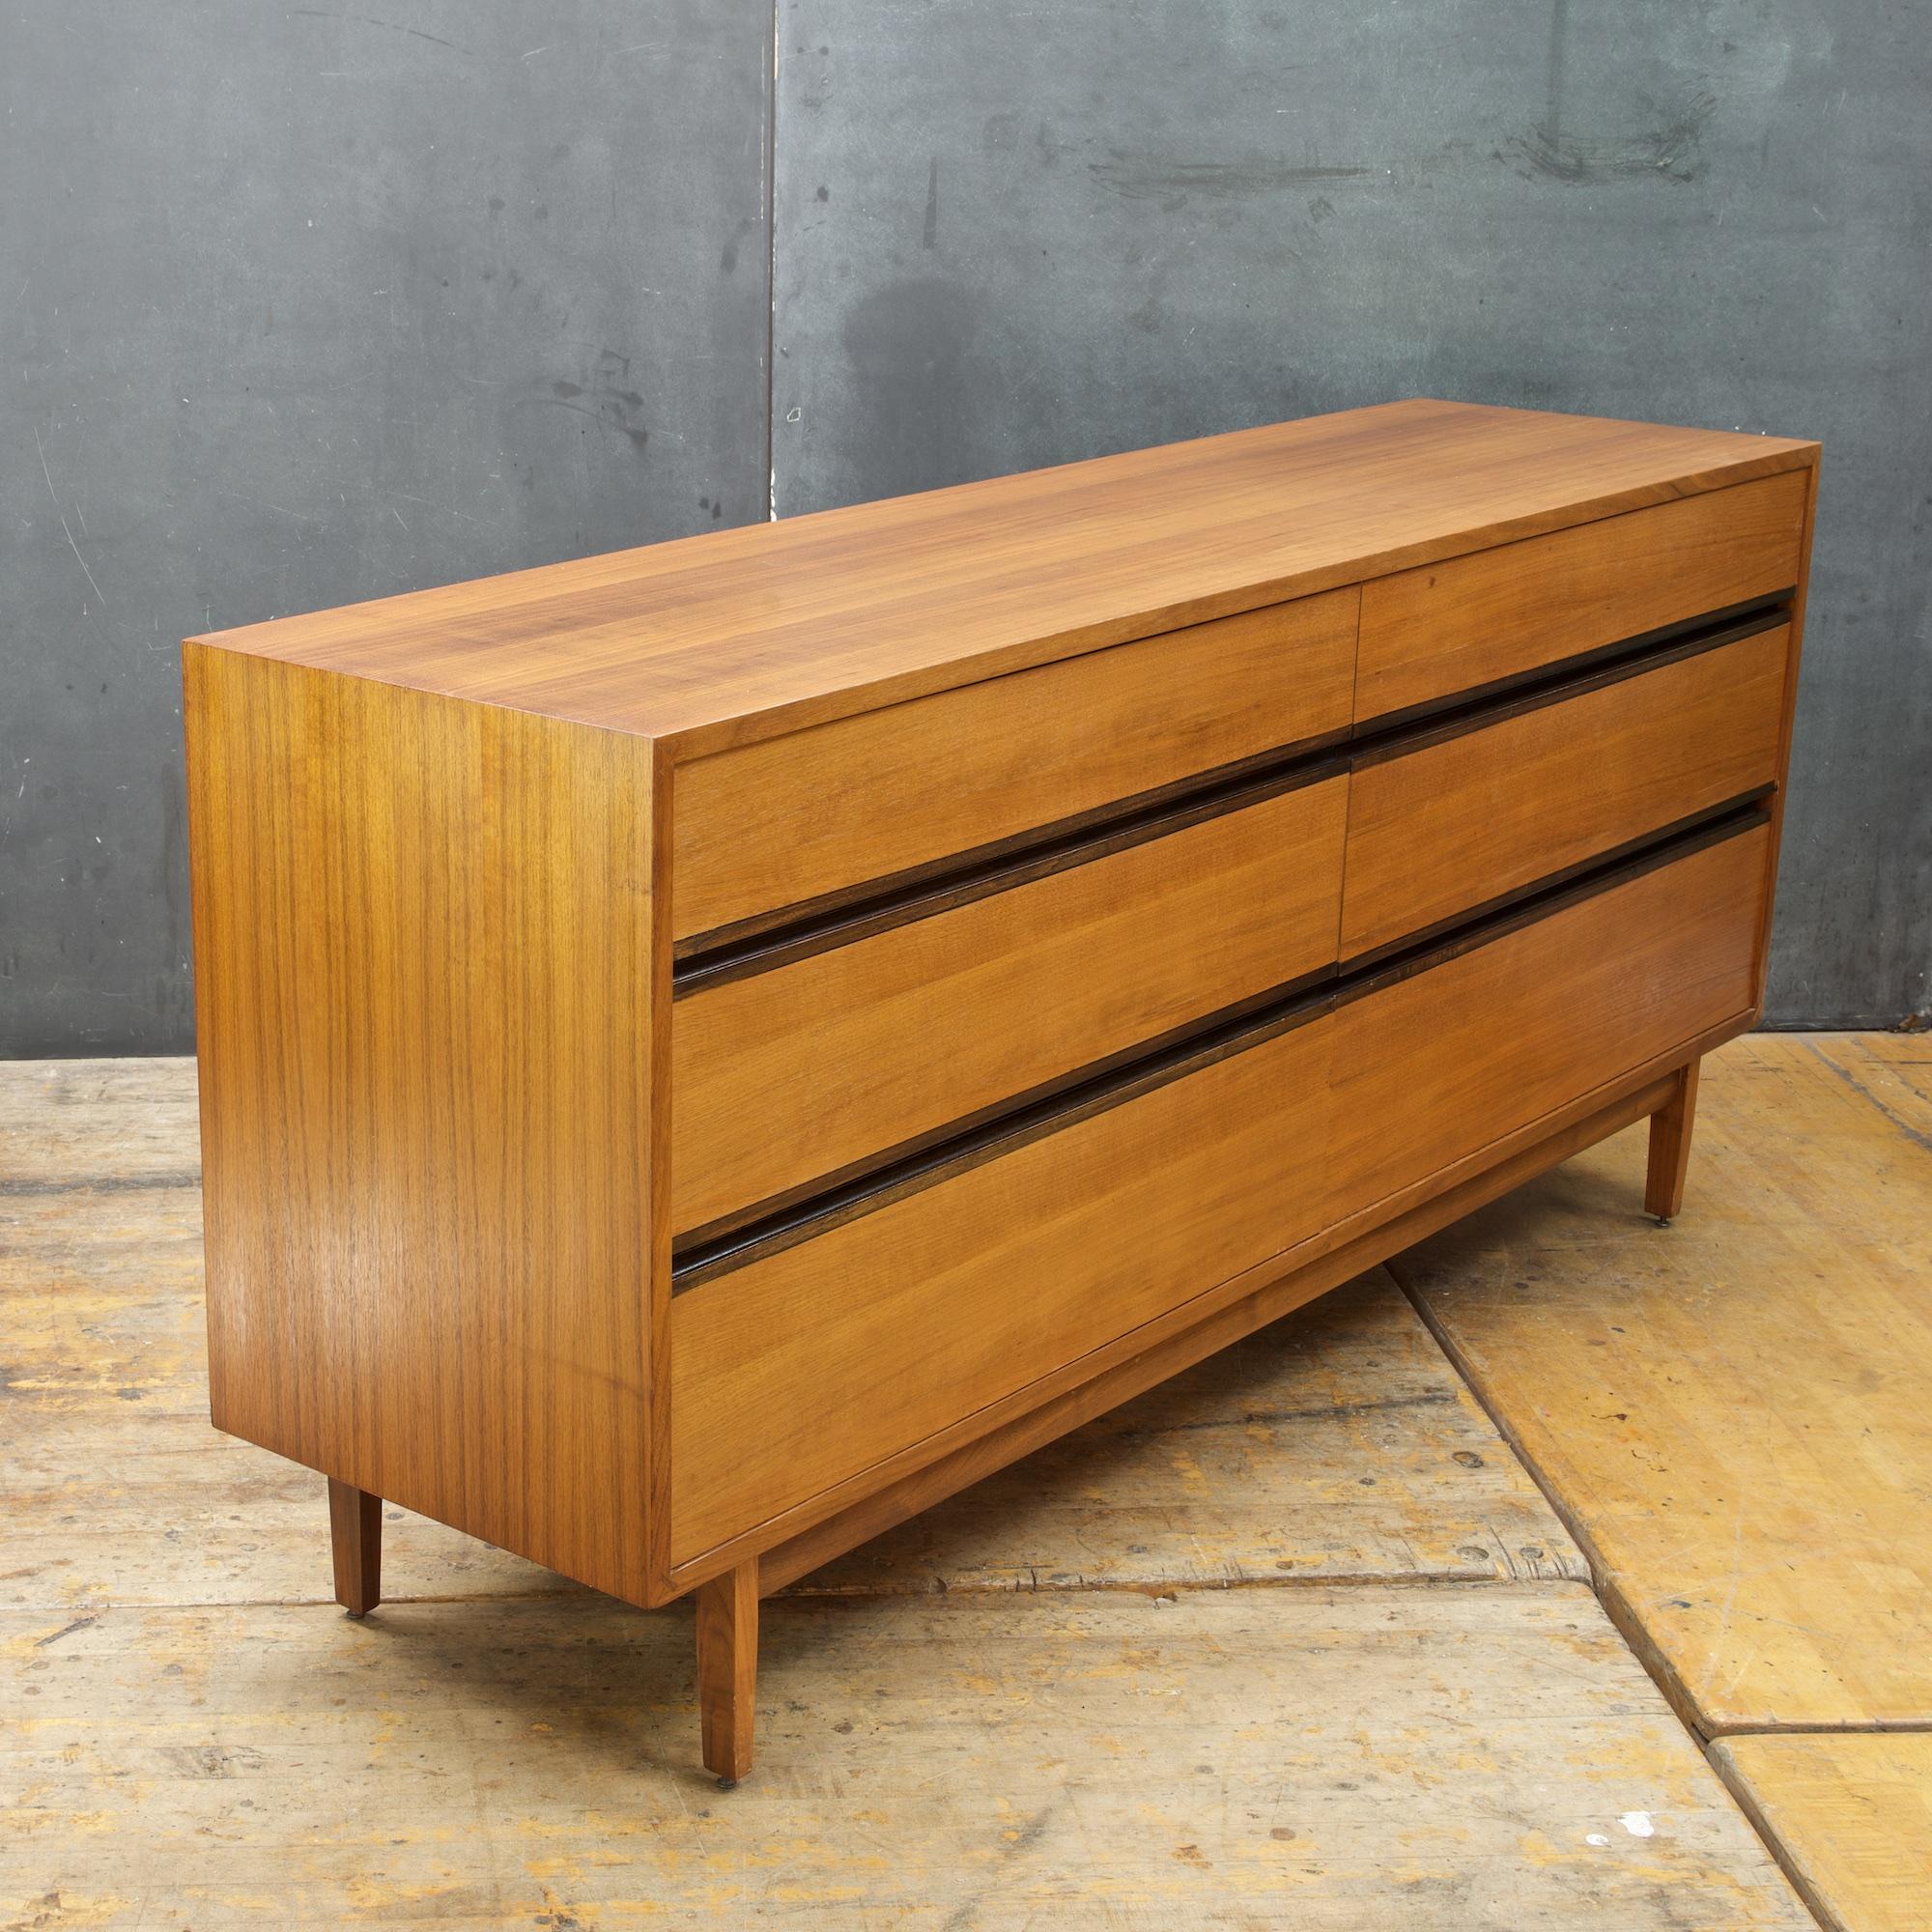 Matching pair of oiled walnut nightstands designed by Kipp Stewart for Calvin Furniture's American Design Foundation line. Rare design, with wonderful a nice white interior back surface. Original finish.

Measures: W 66 x D 17 x H 30 1/4 in.
 